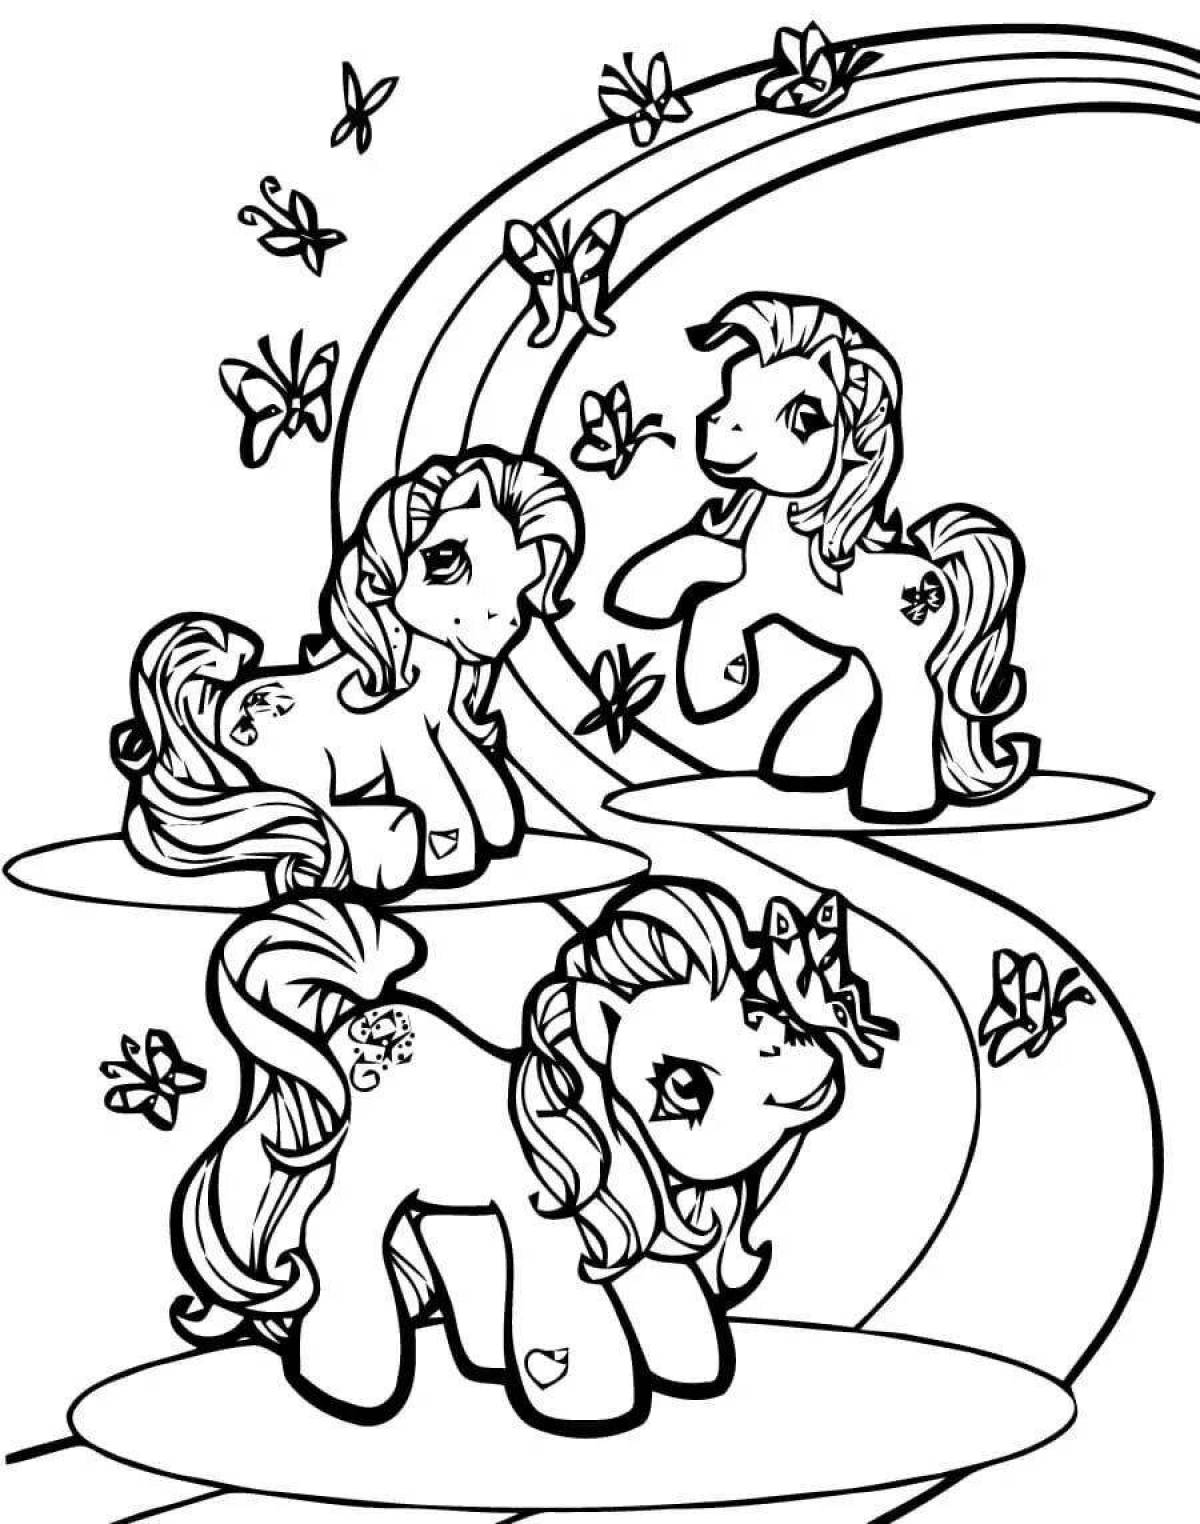 Exalted coloring page my coloring collection